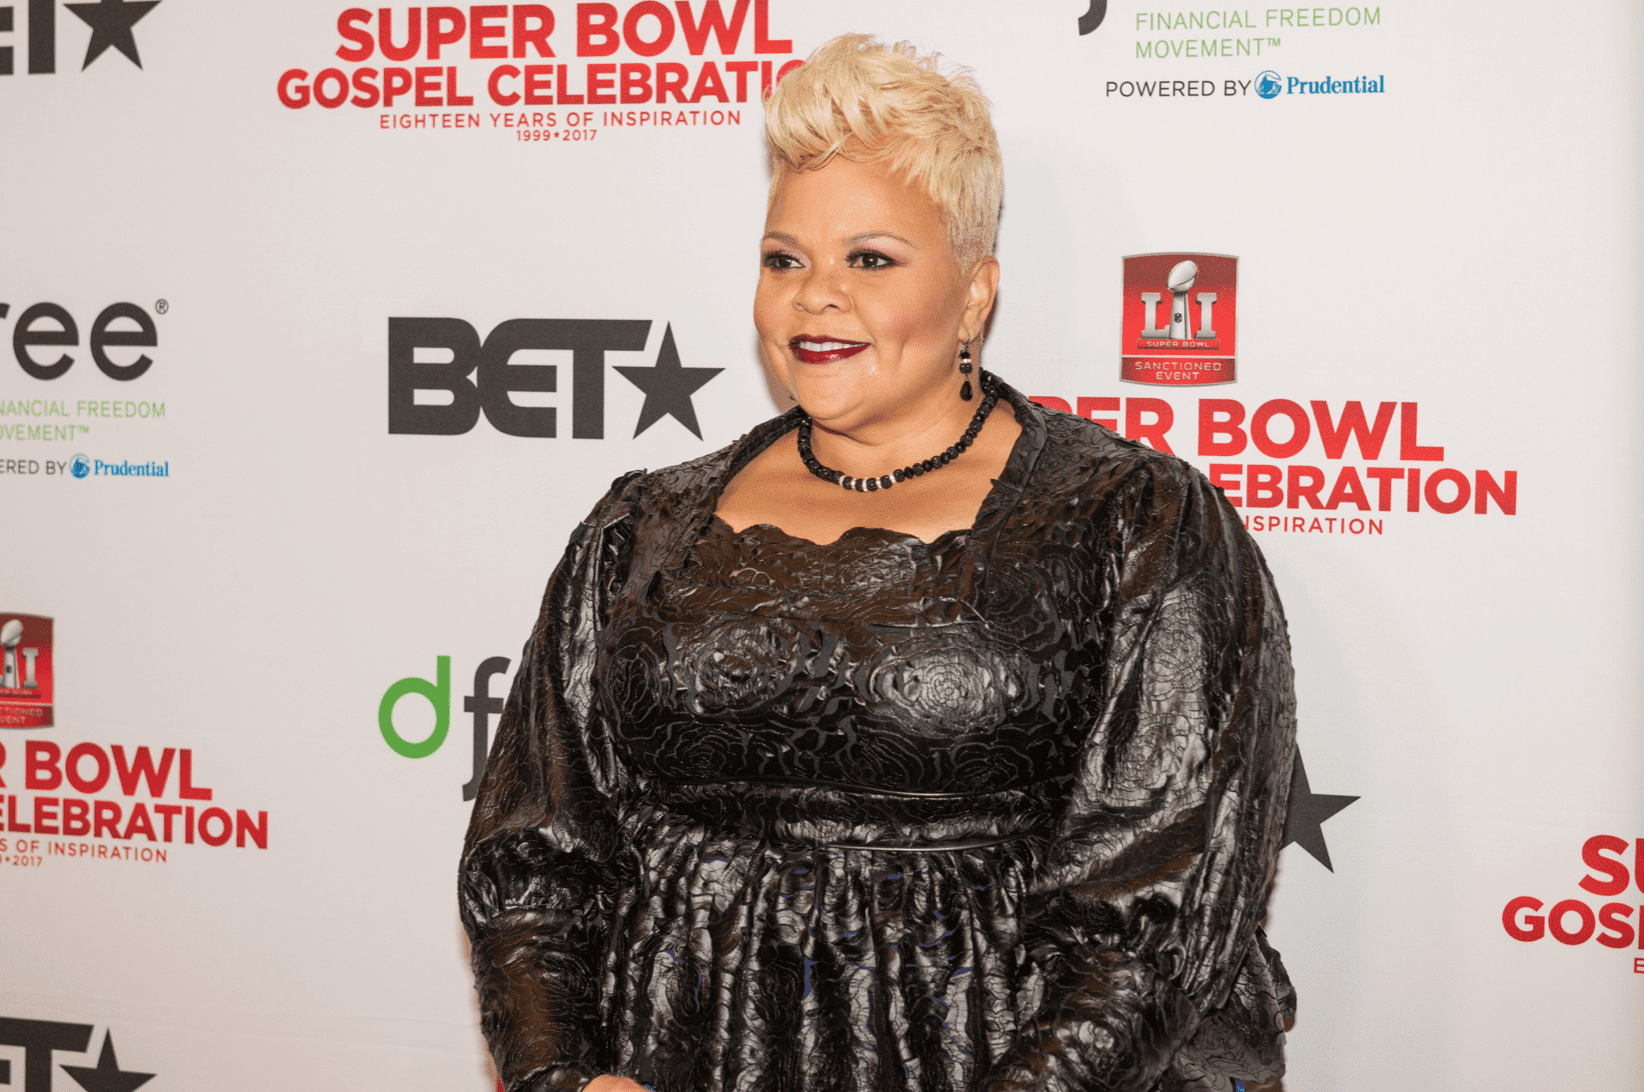 Tamela Mann attends BET's Super Bowl Gospel Celebration at Lakewood Church on February 3, 2017. | Source: Getty Images